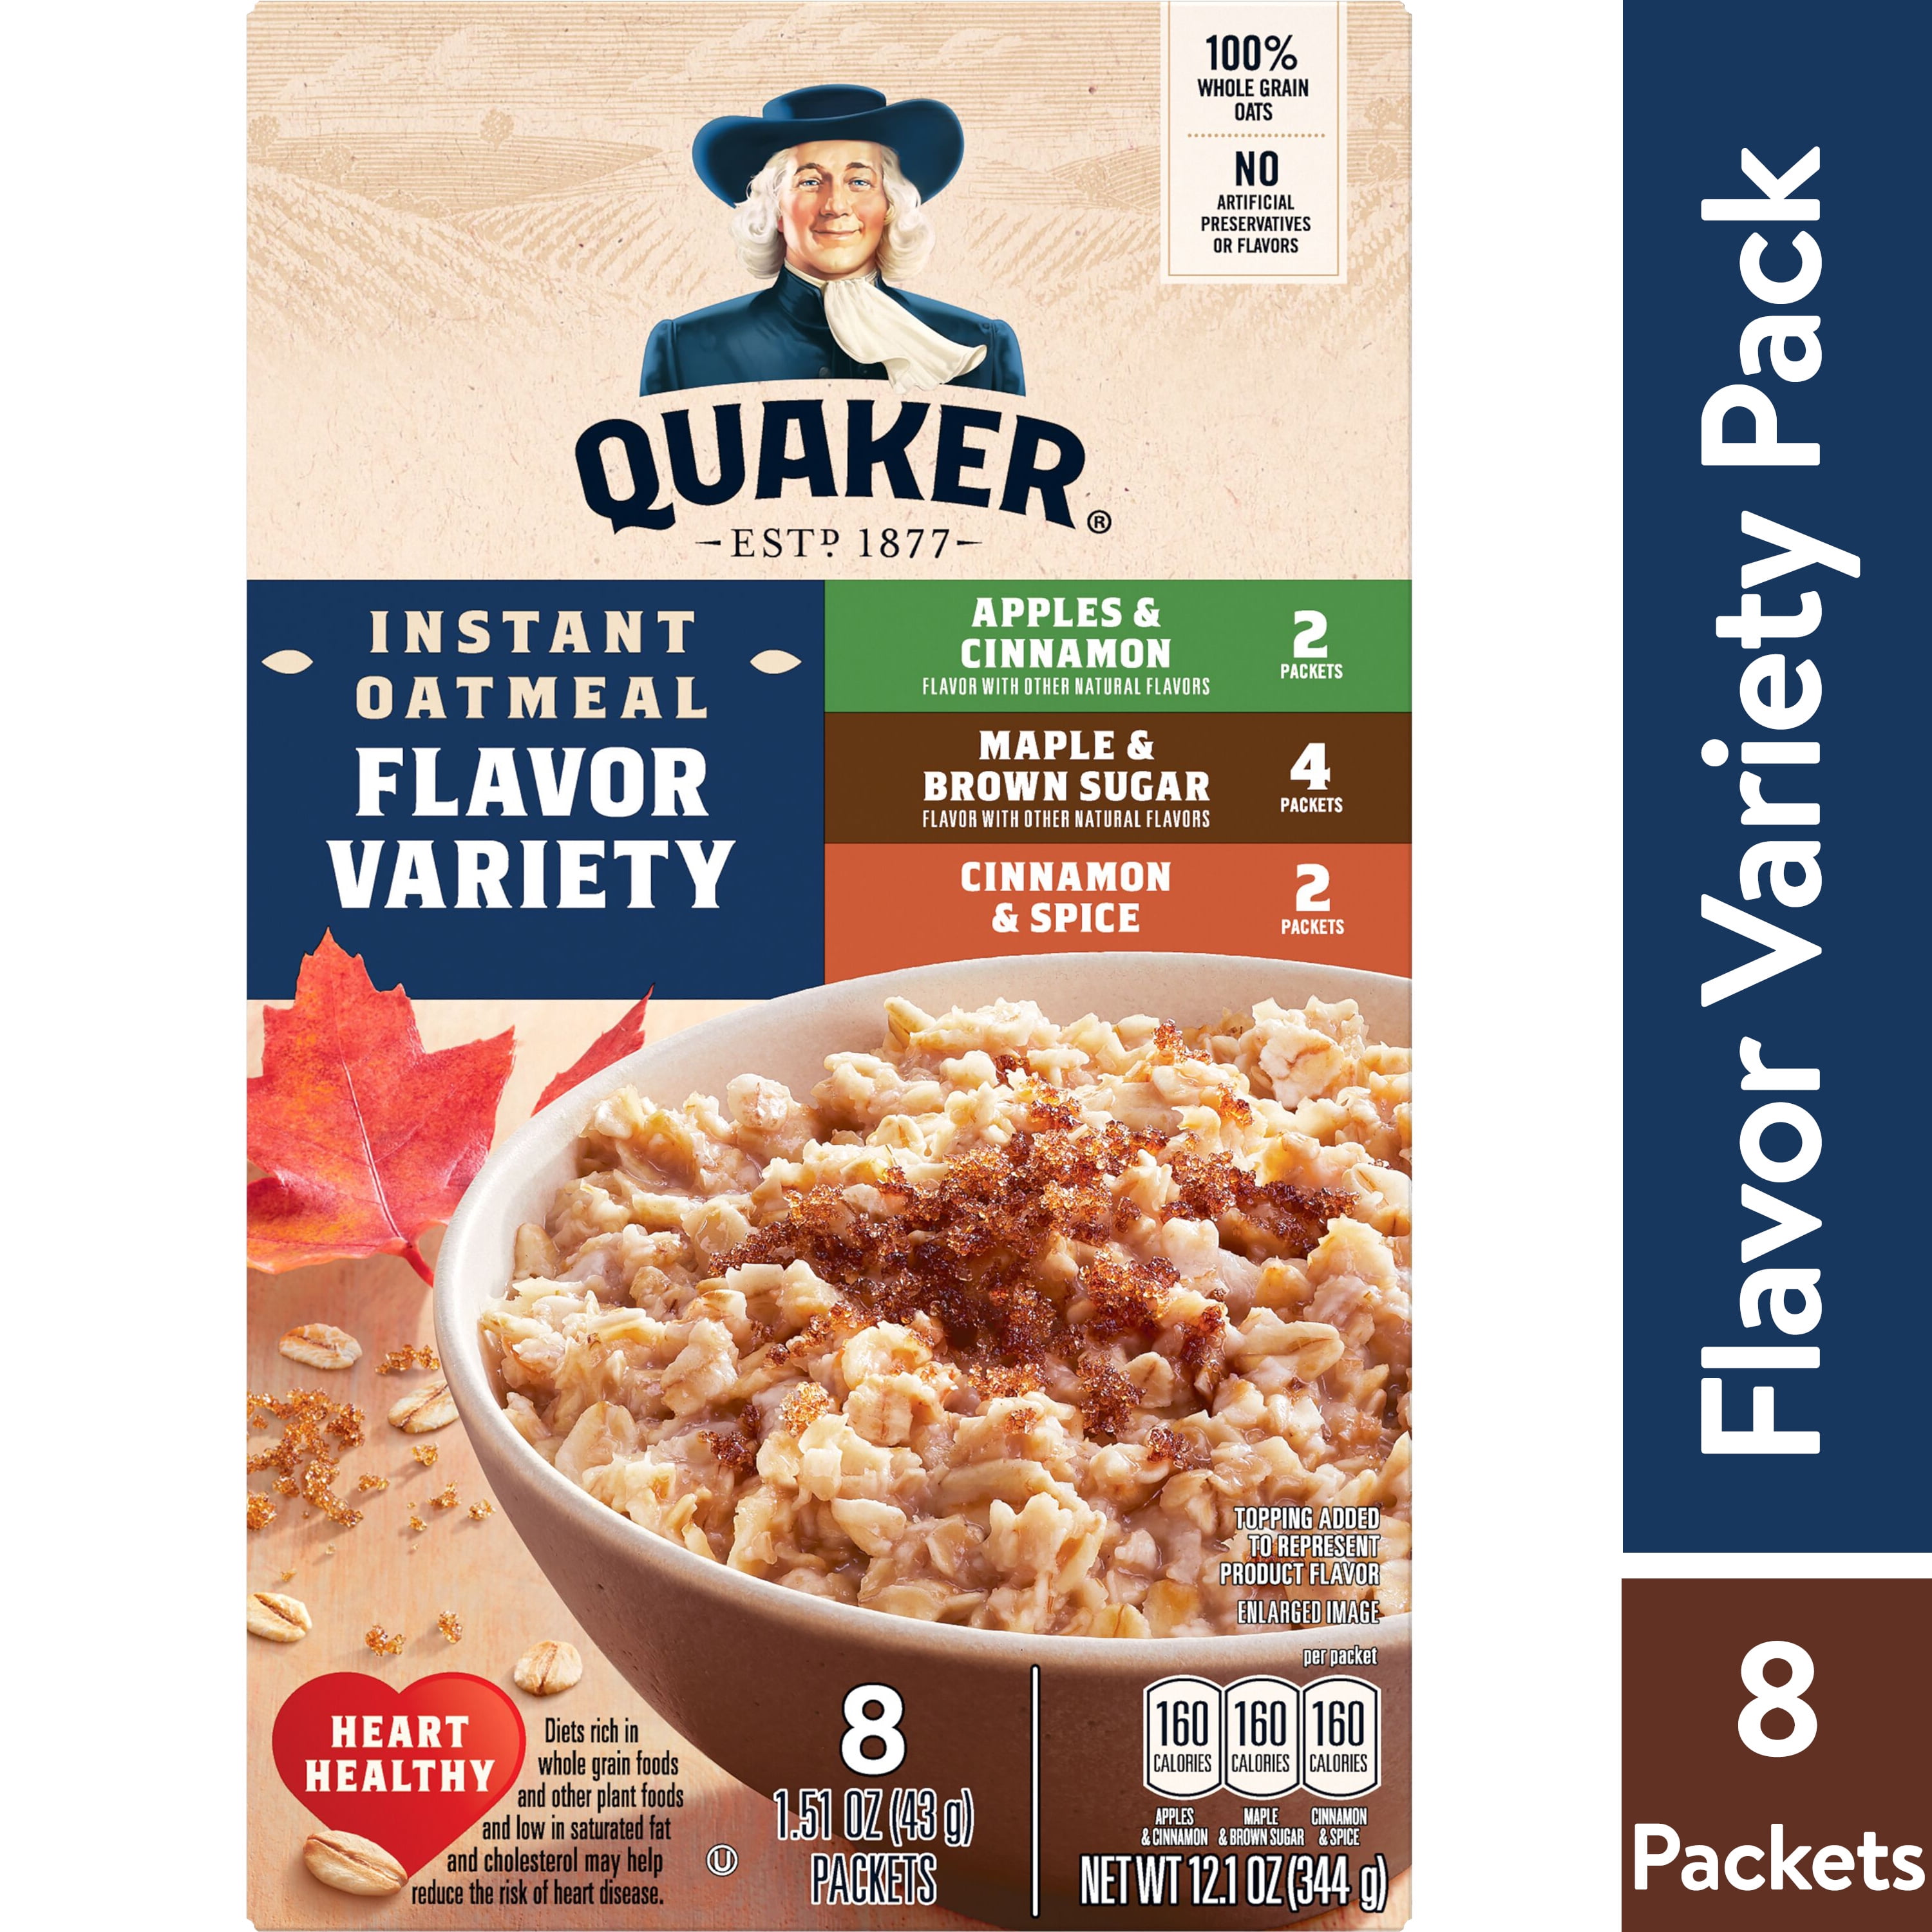 Quaker Instant Oatmeal, Variety, 12.1 Oz, 12 Count